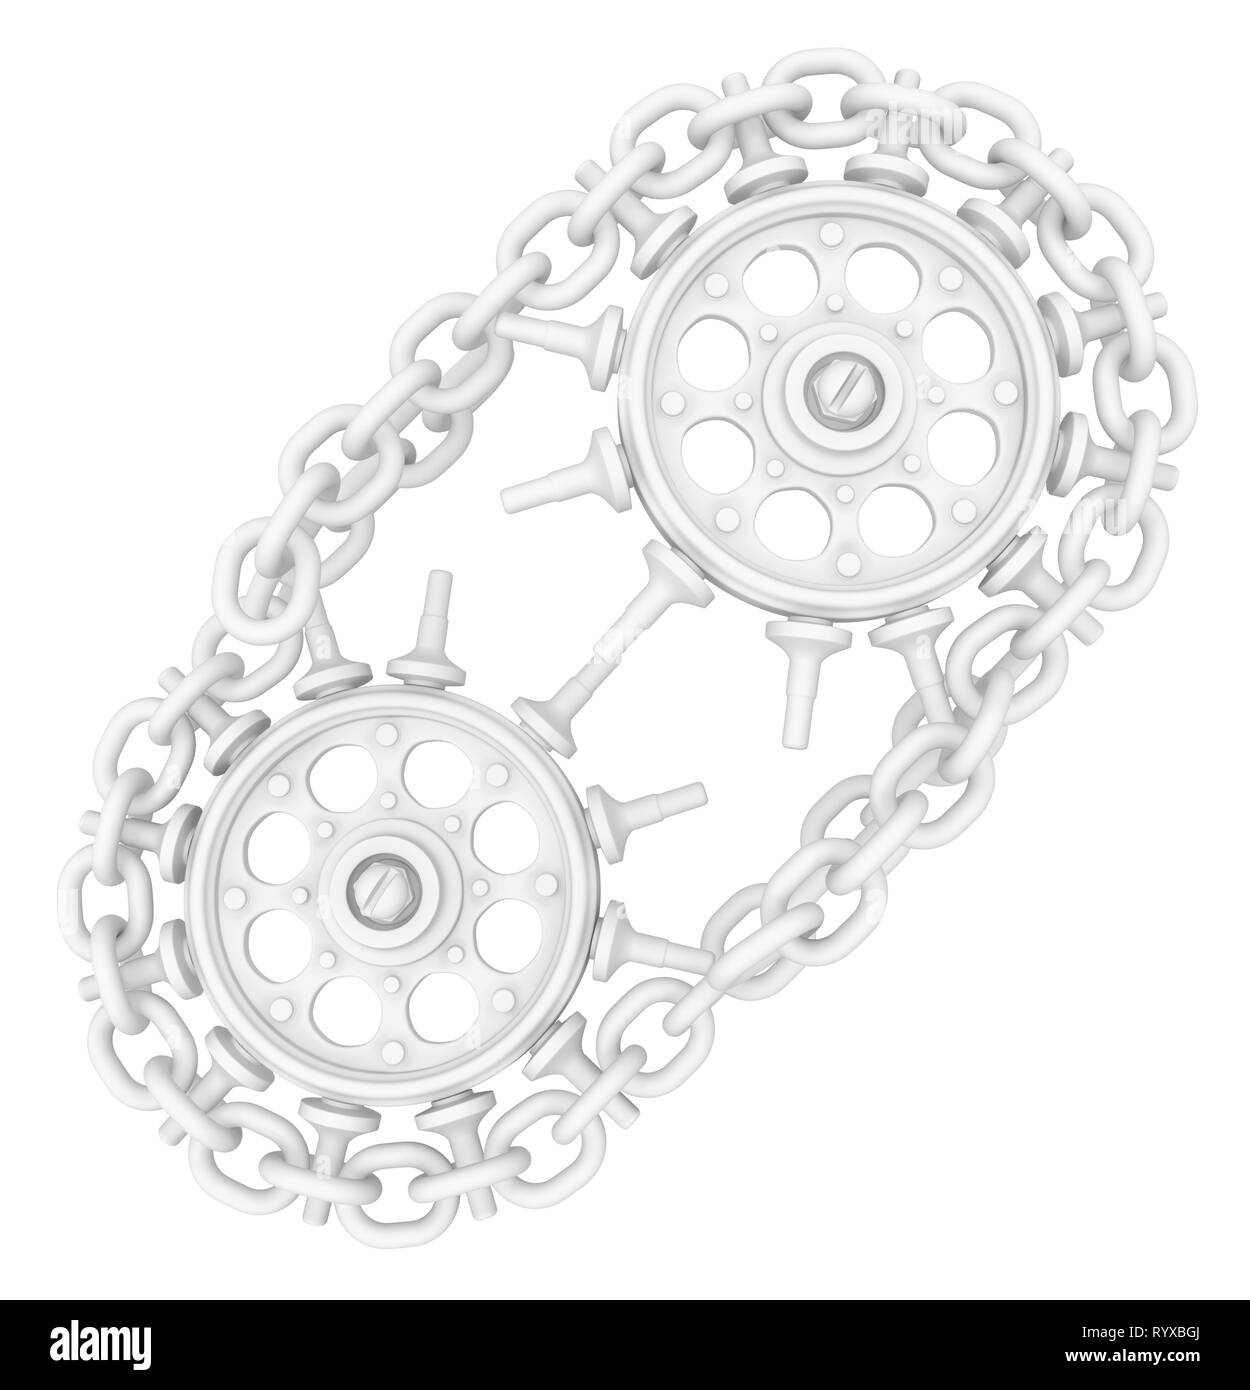 Chain two gear wheels white 3d illustration, isolated, vertical Stock Photo